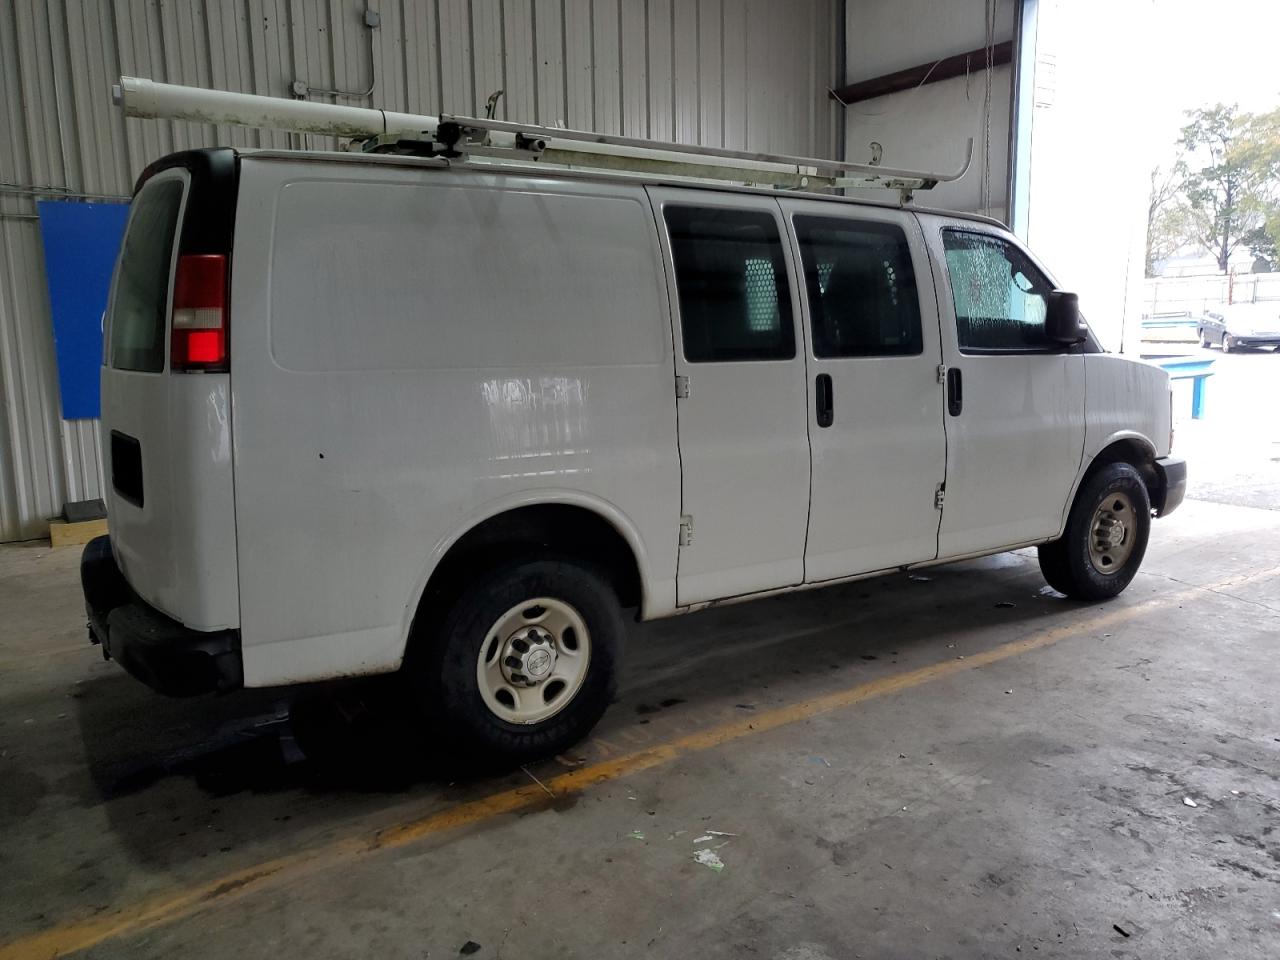 1GCWGFCF7F1****** Salvage and Repairable 2015 Chevrolet Express in AL - Eight Mile